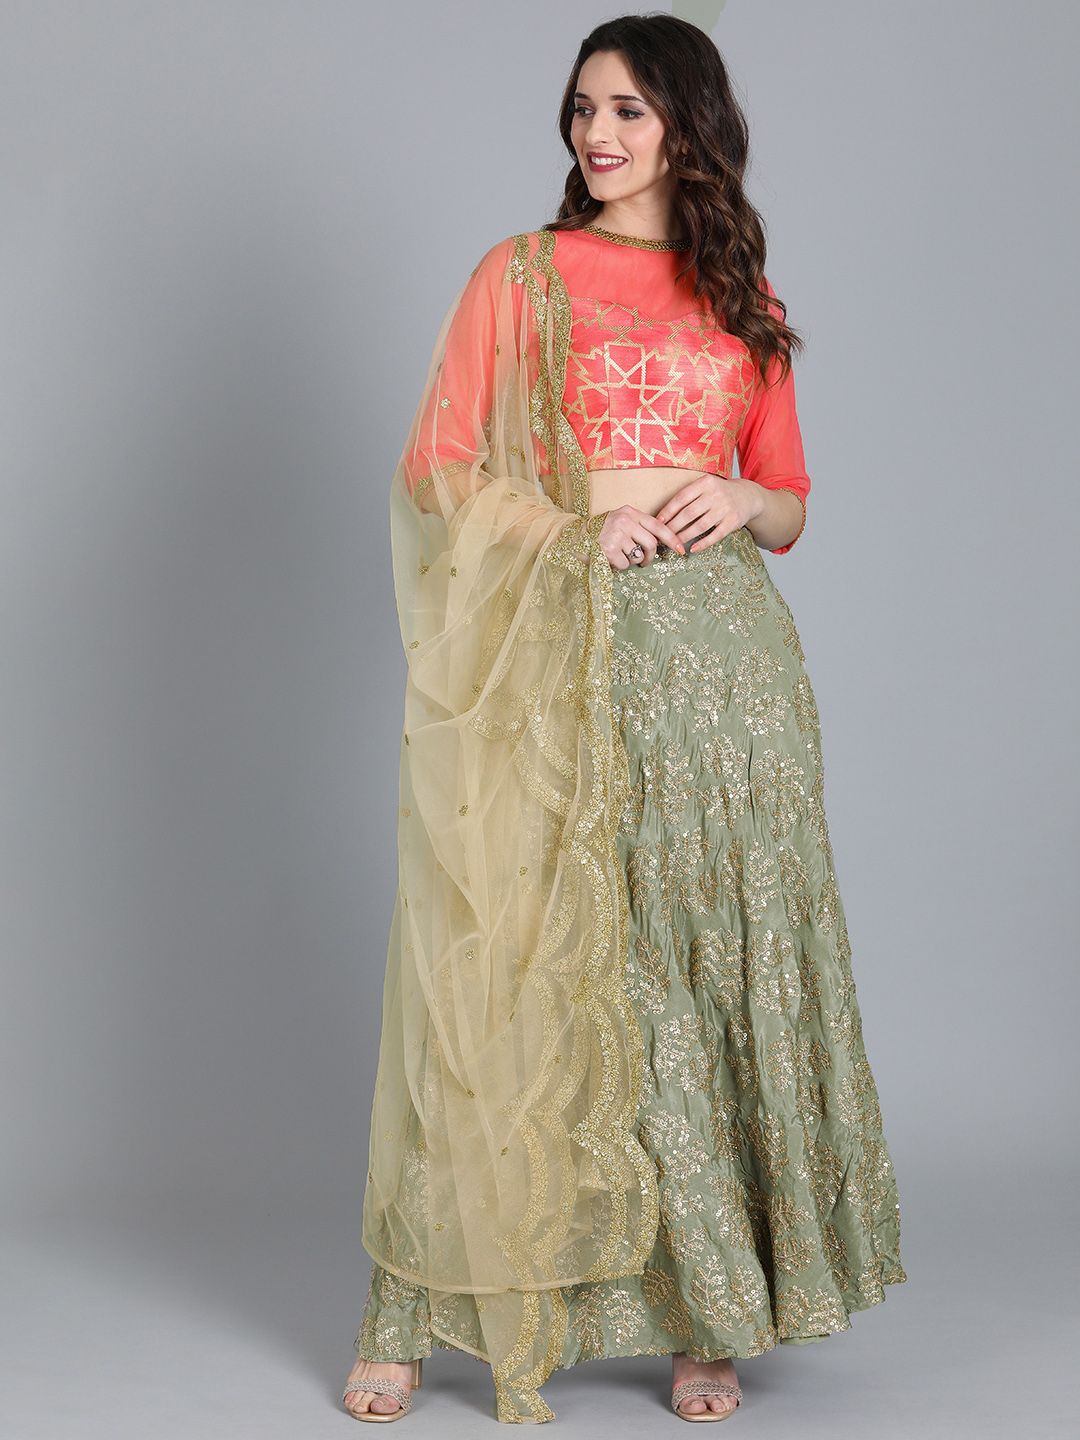 EthnoVogue Pink & Green Embellished Made to Measure Lehenga & Blouse with Dupatta Price in India